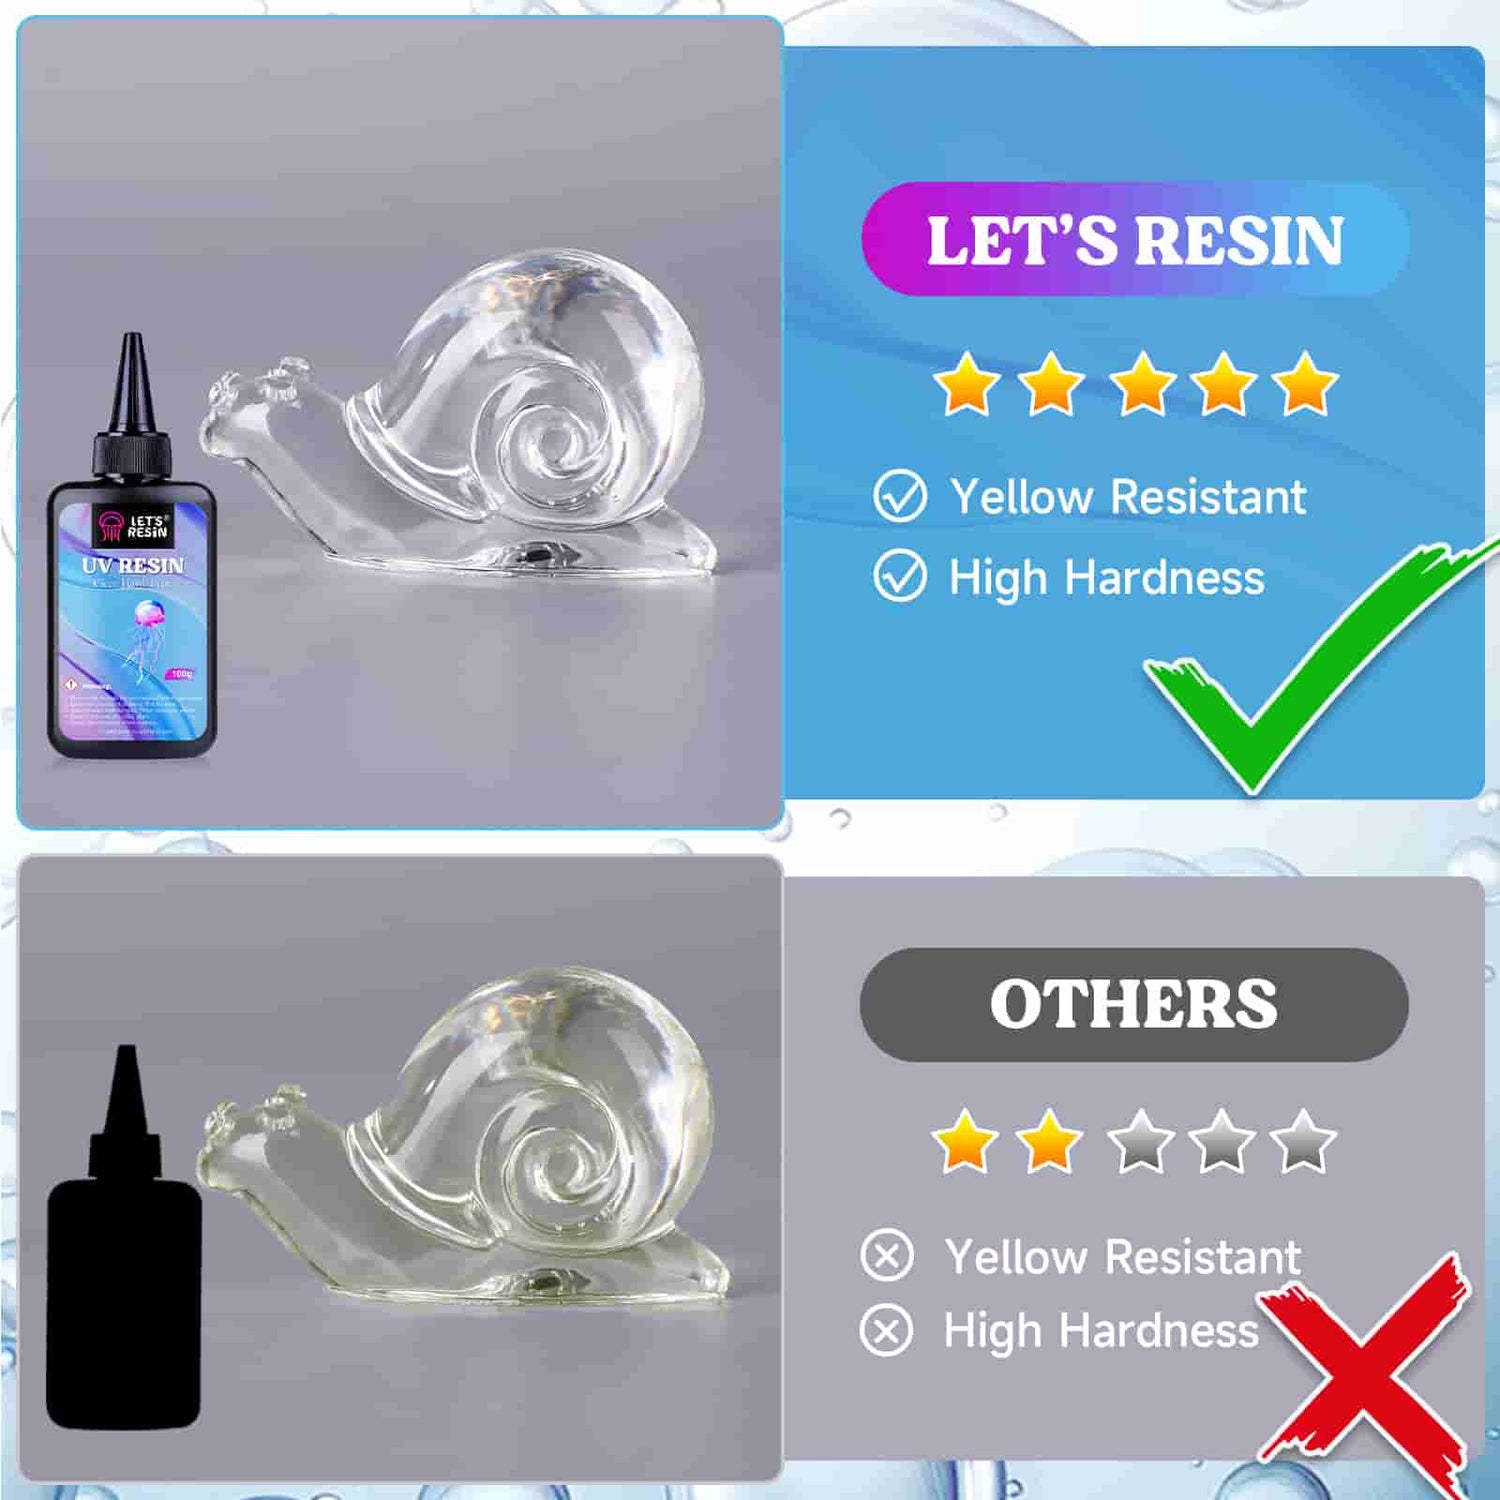 Let's Resin Crystal Clear UV Resin (Hard Type 2.0) - 200g, Ultraviolet Epoxy Resin for Crafts, Jewelry Making, Coating & Casting